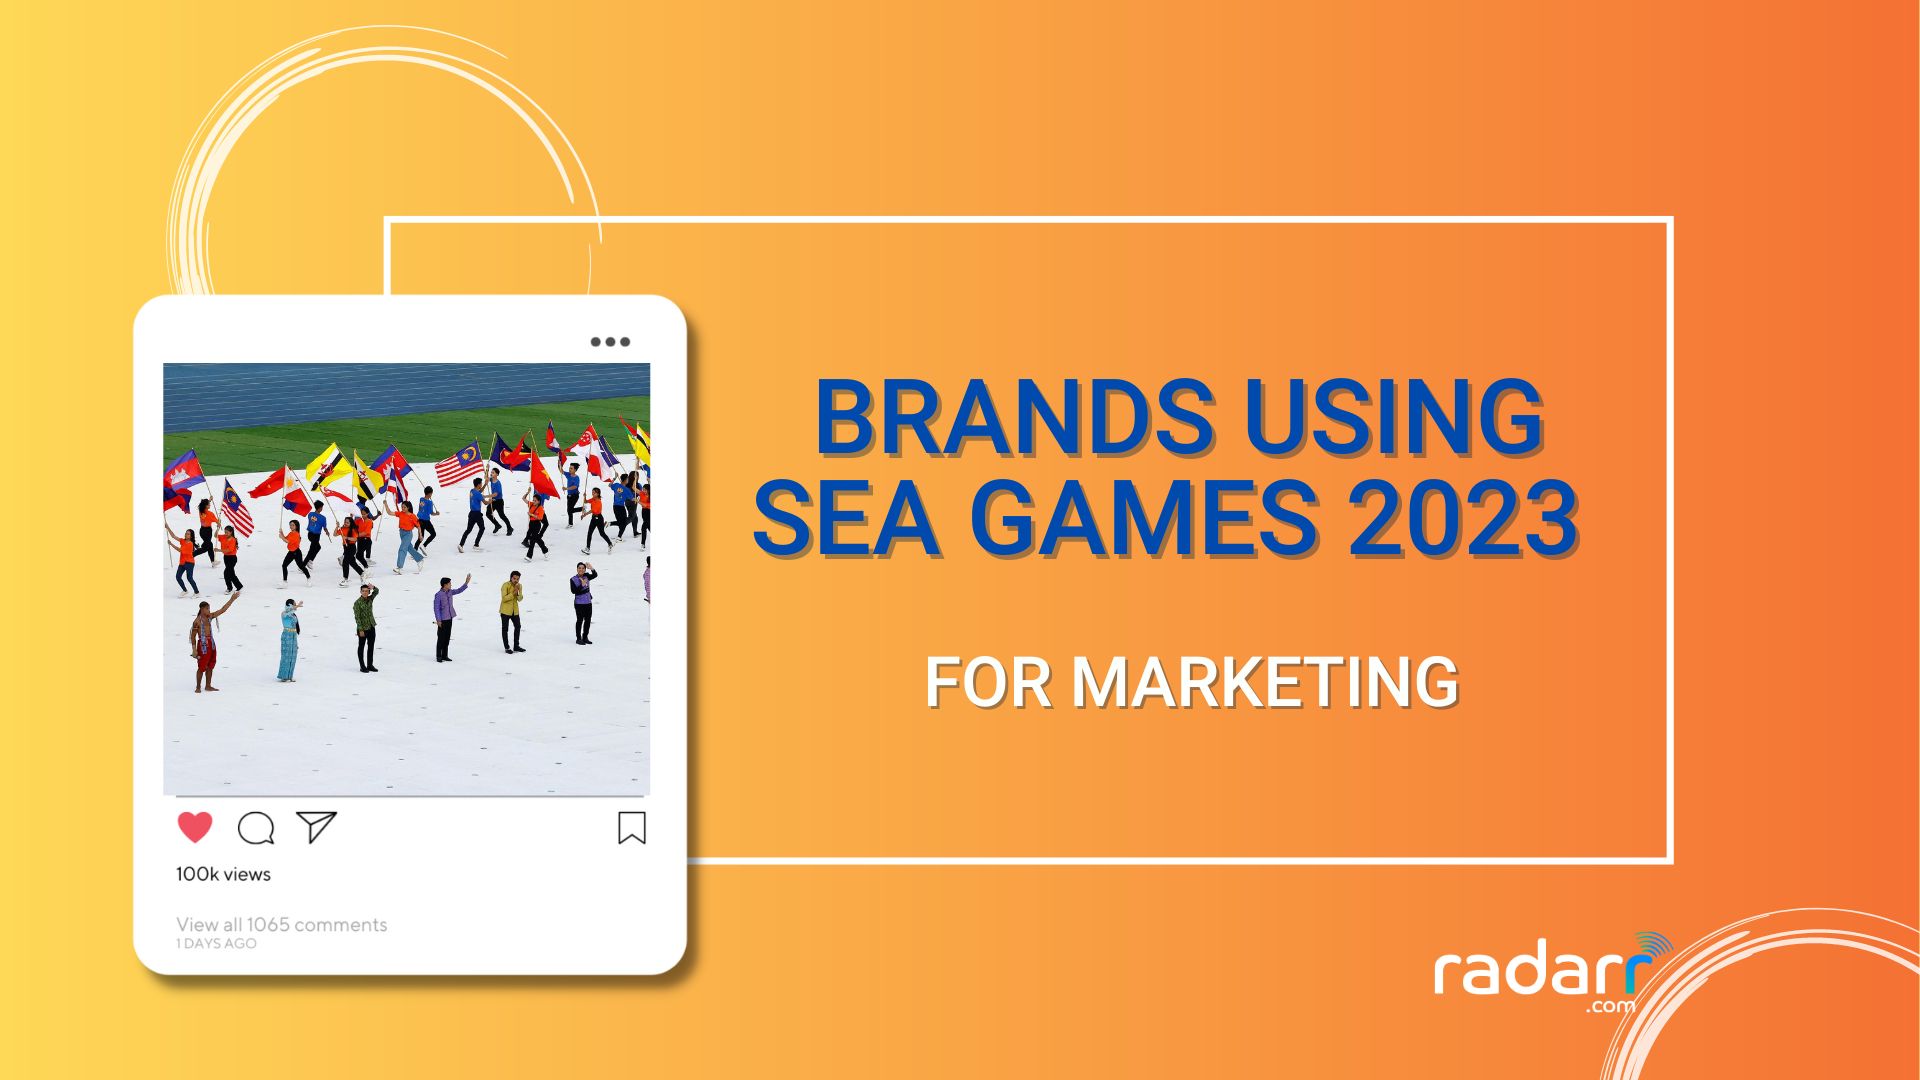 Brand marketing during SEA games 2023